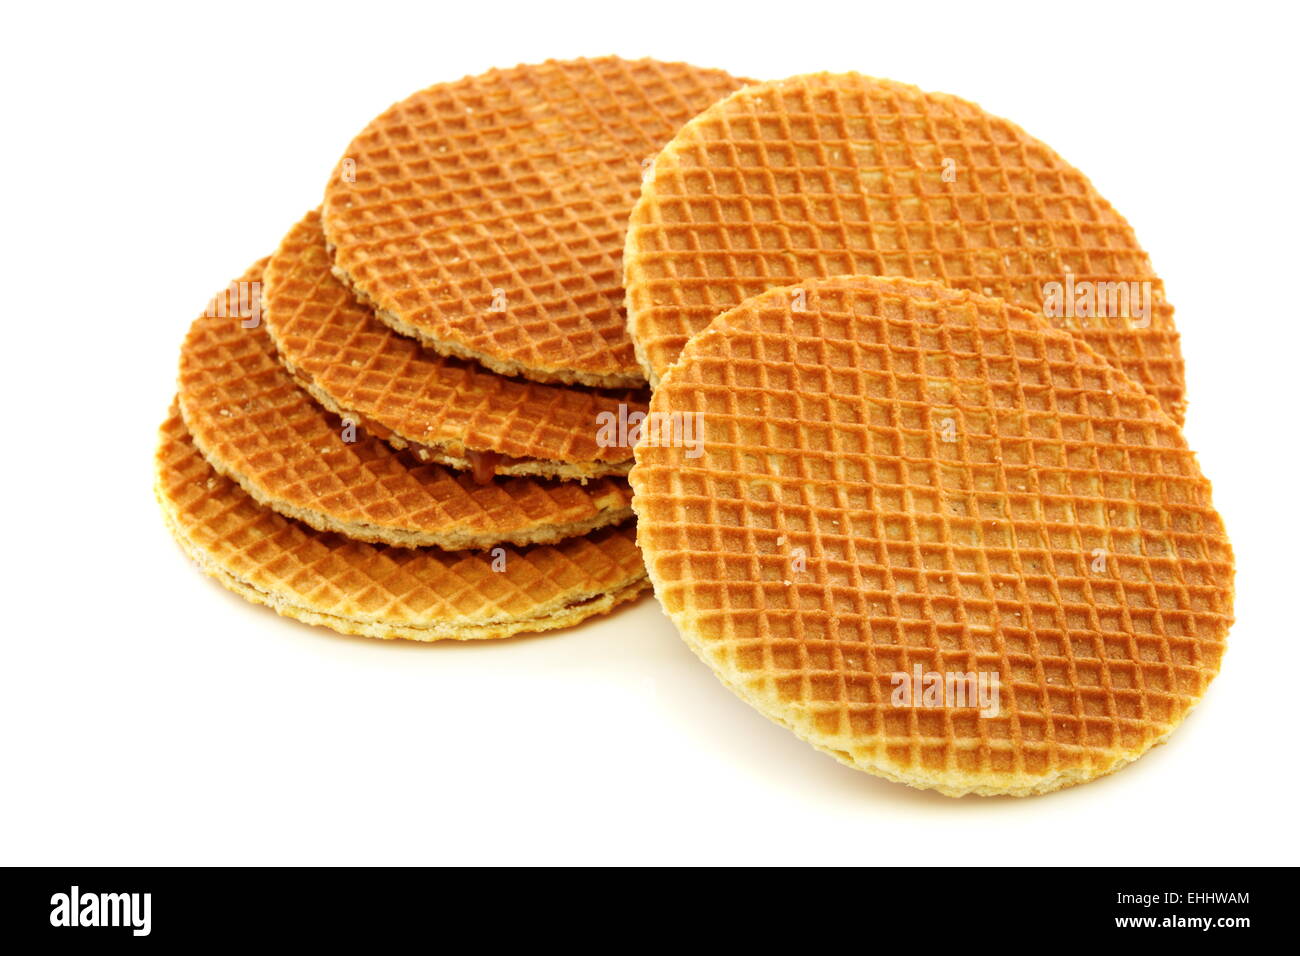 Waffles with caramel filling. Stock Photo